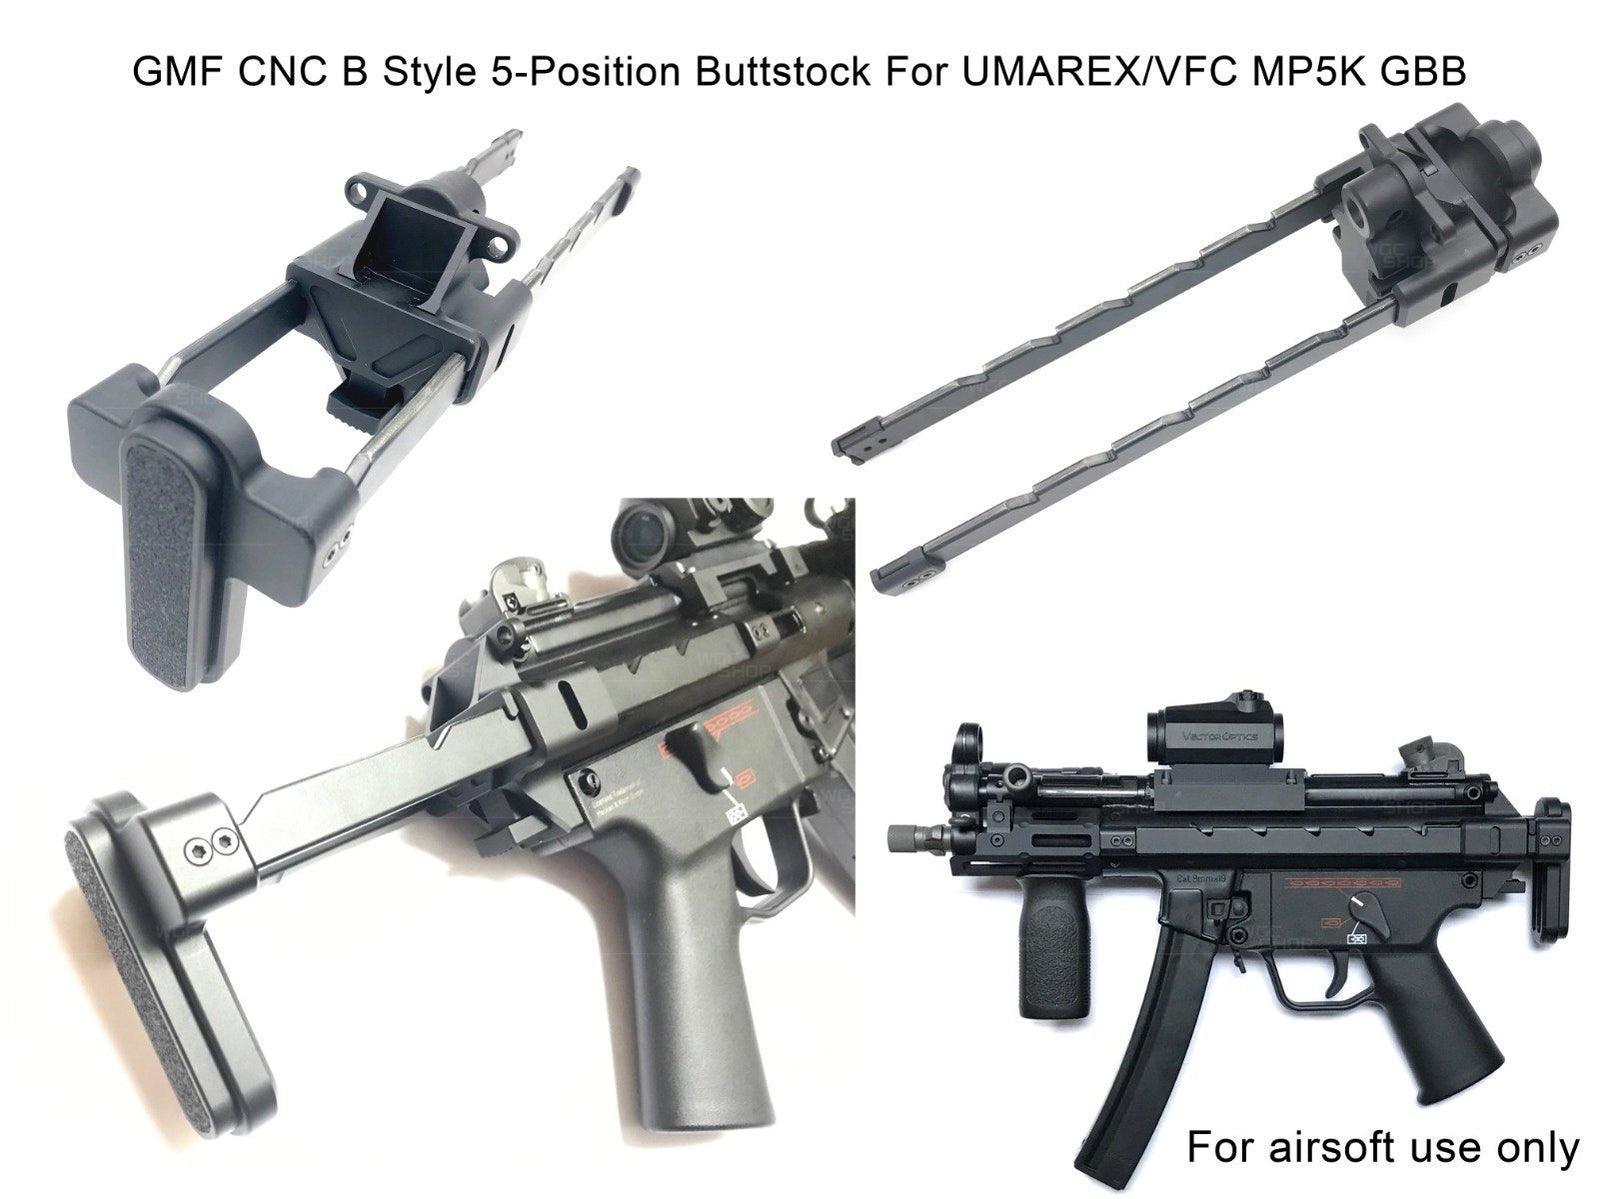 BOW MASTER x GMF 5 Position Buttstock for VFC MP5K GBB Airsoft 